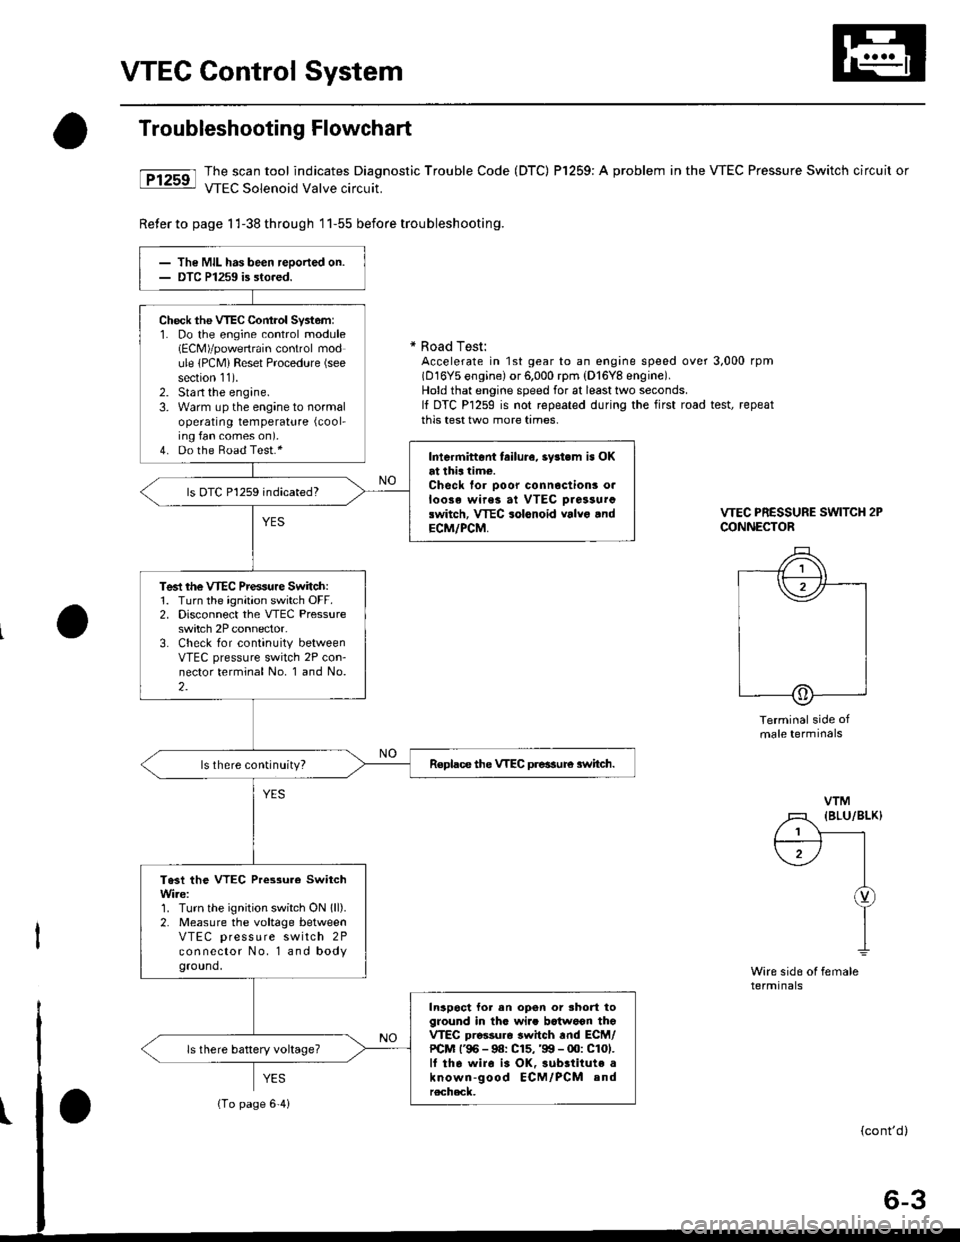 HONDA CIVIC 1998 6.G User Guide VTEC Control System
Troubleshooting Flowchart
tFtrsrl #ilH:::lj1t:"J:T,?ffnostic 
rrouble code (Drc) Pr25e: A probrem in the vrEc Pressure switch circuit or
Reter to page 1 l-38 th roug h 1 1-55 befor